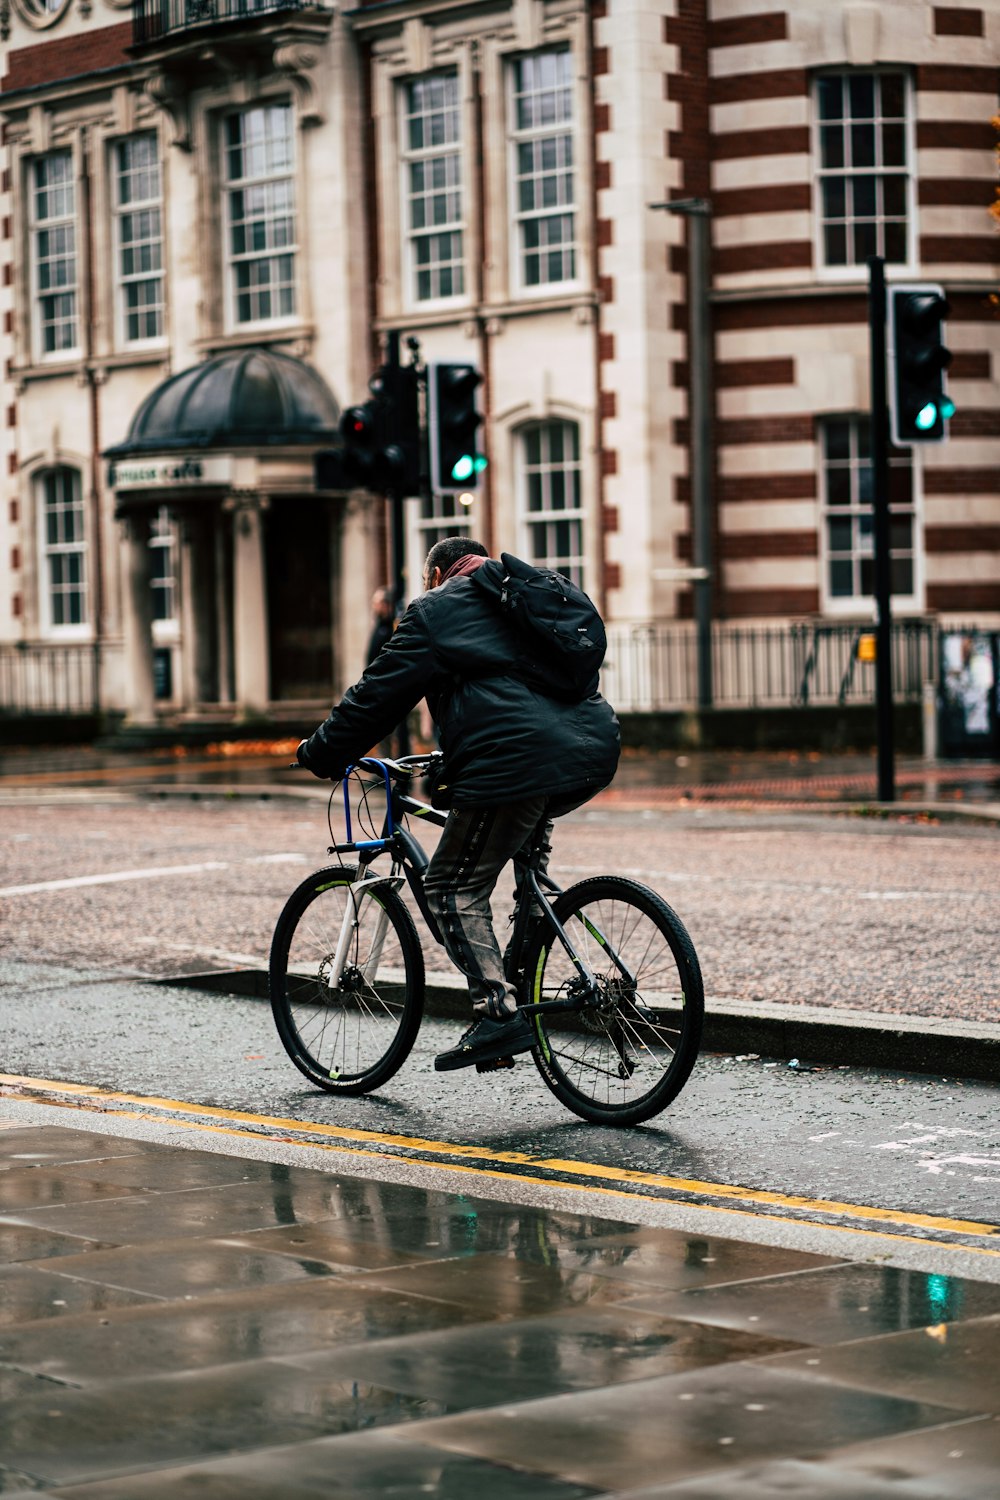 a person riding a bicycle on a wet street